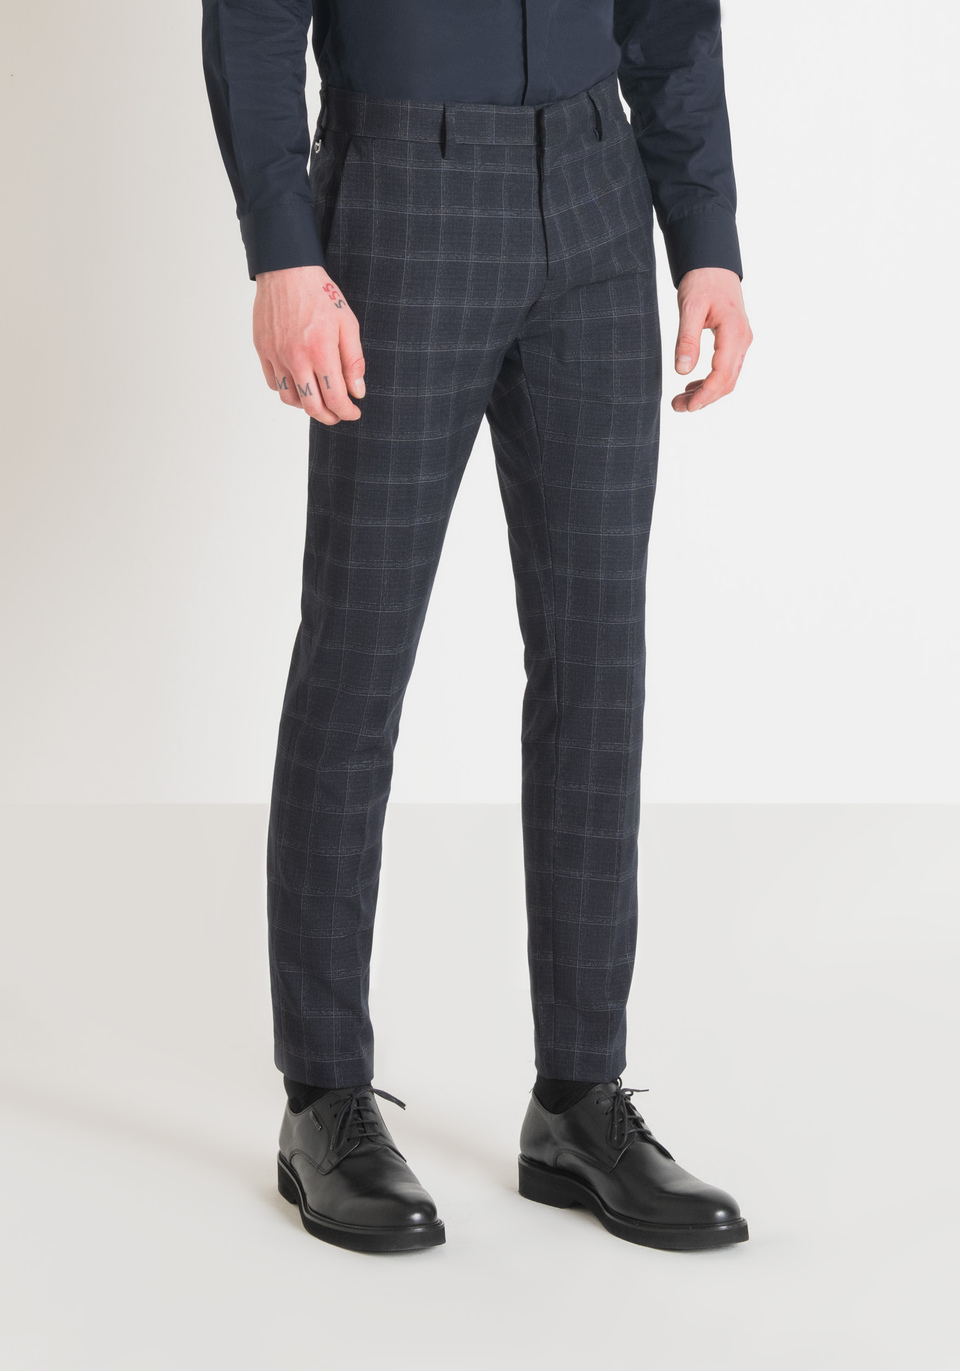 "BONNIE" SLIM FIT TROUSERS IN STRETCH VISCOSE BLEND FABRIC WITH CHECK PATTERN - Antony Morato Online Shop